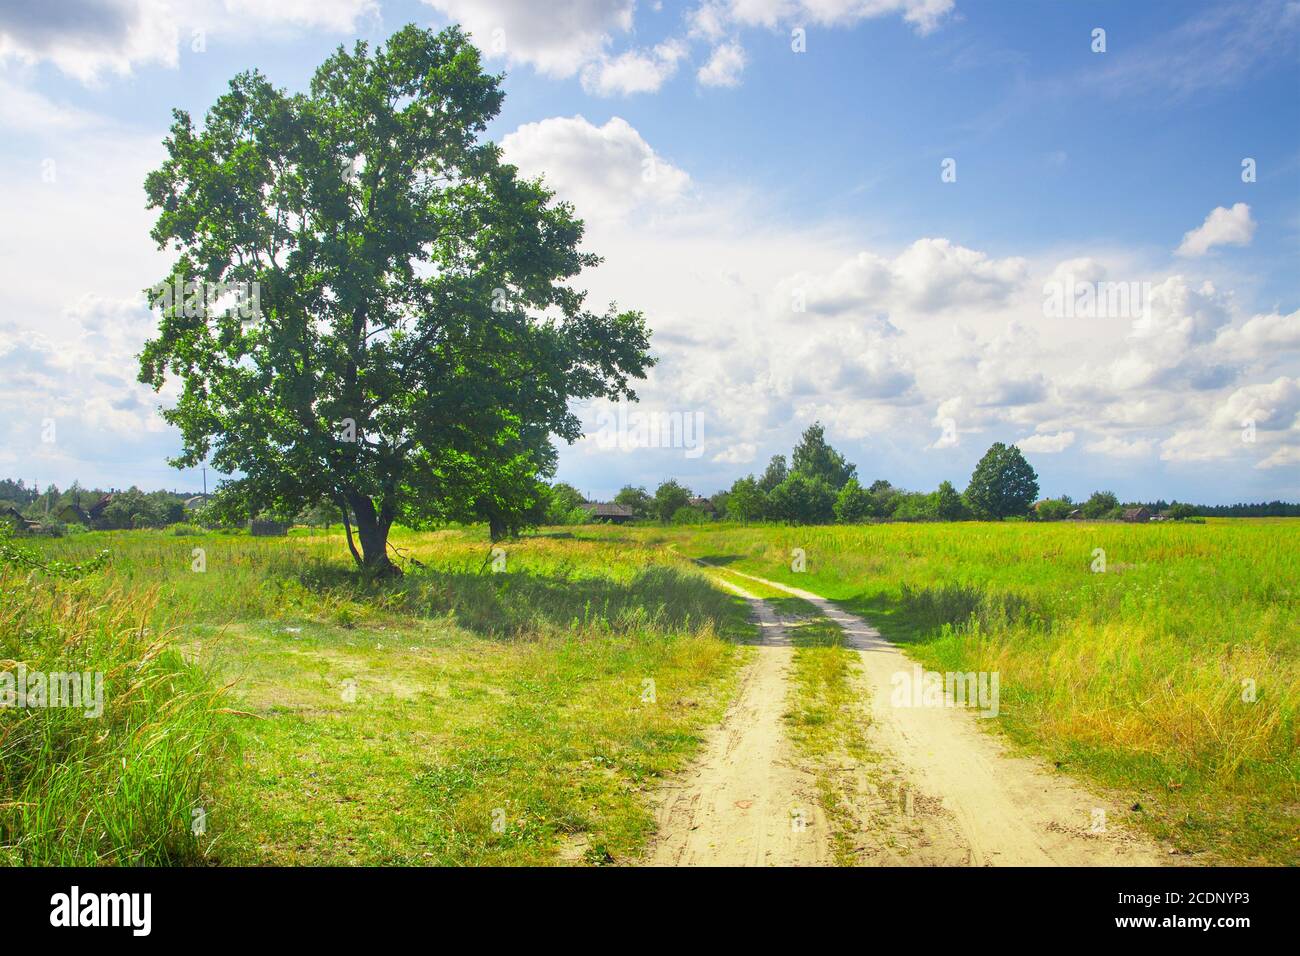 beautiful green tree on field with dirt road Stock Photo